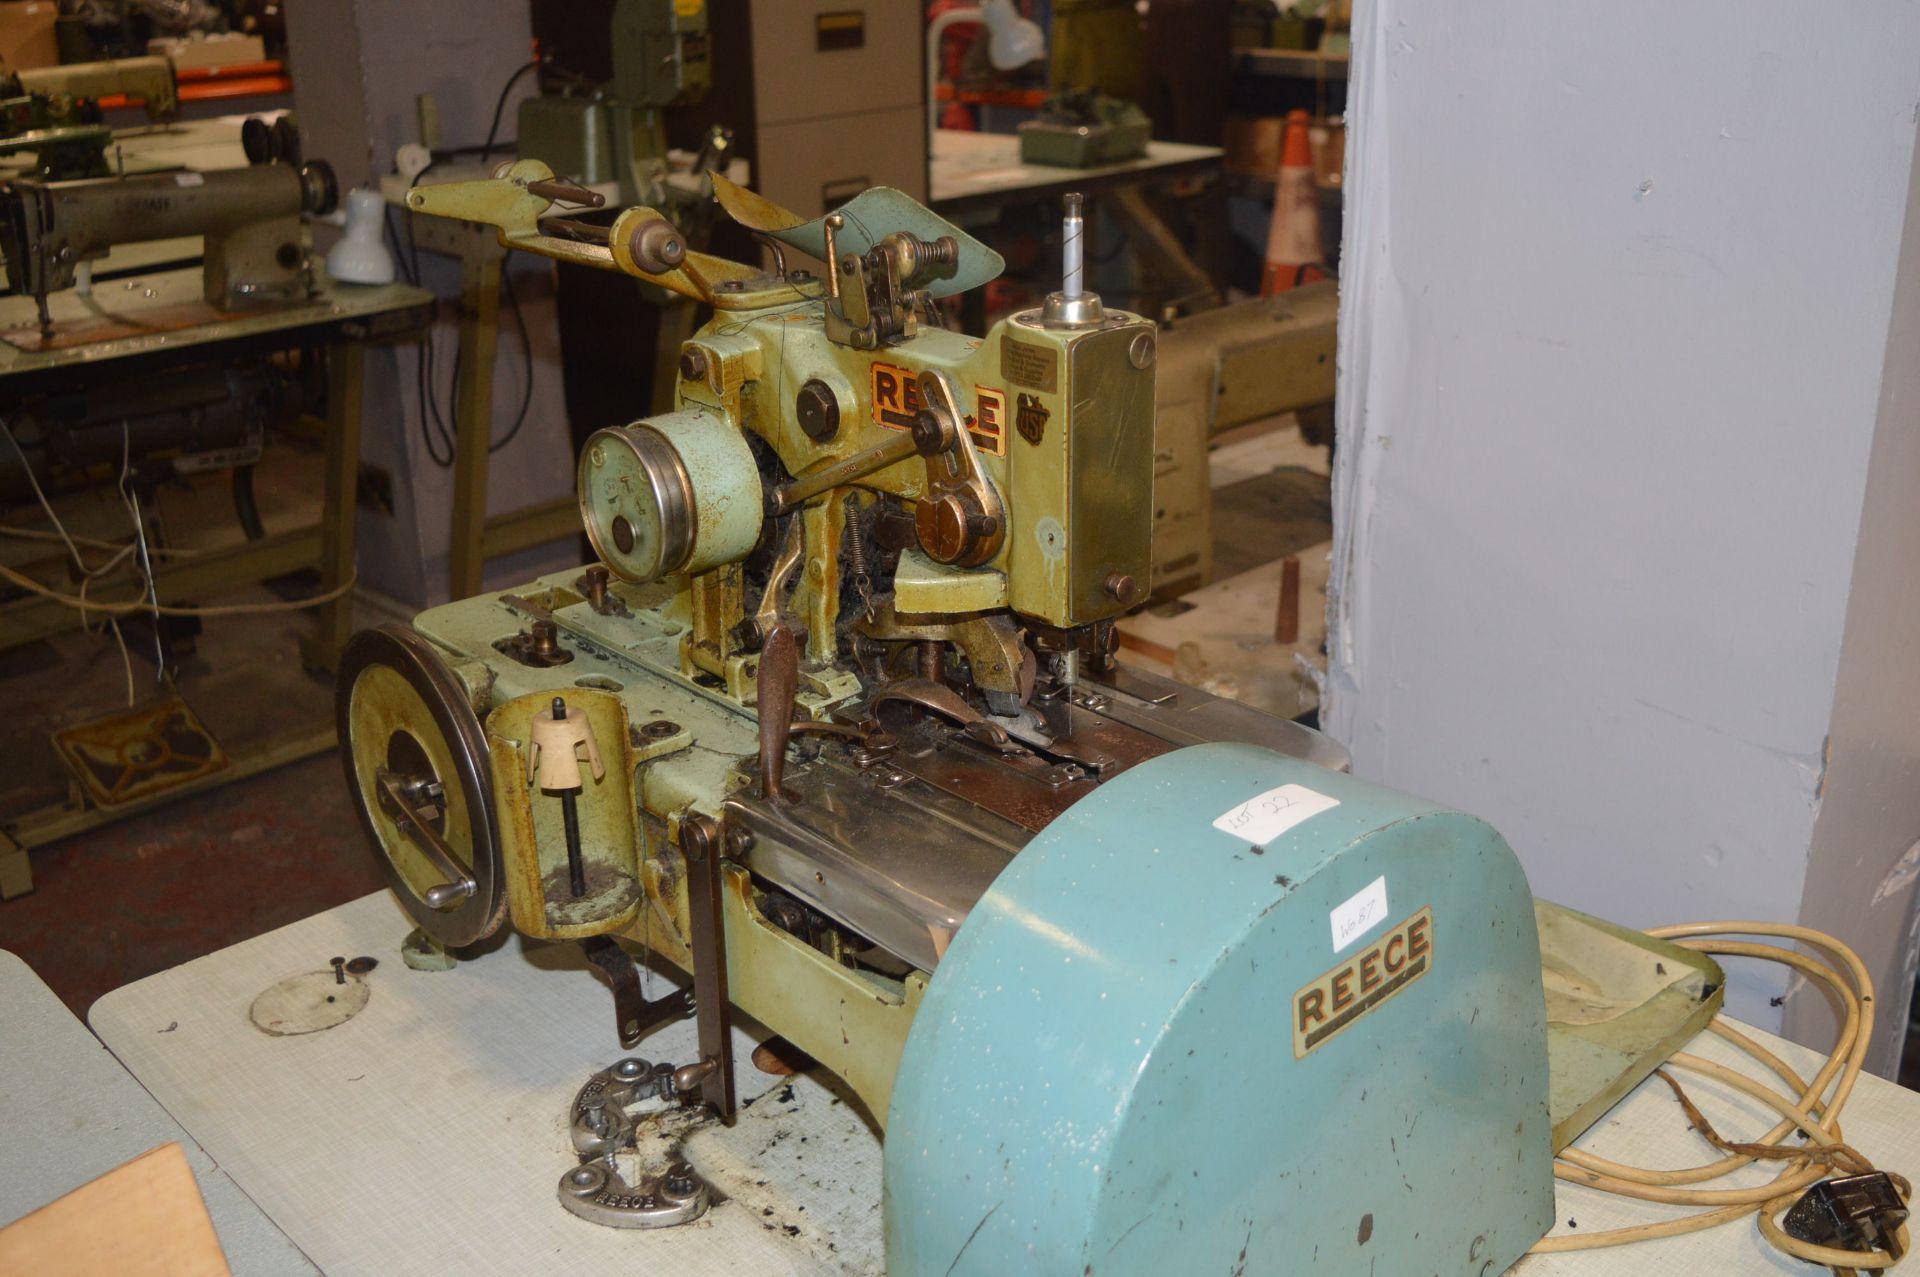 Reece Buttonhole Sewing Machine on Table (no motor)